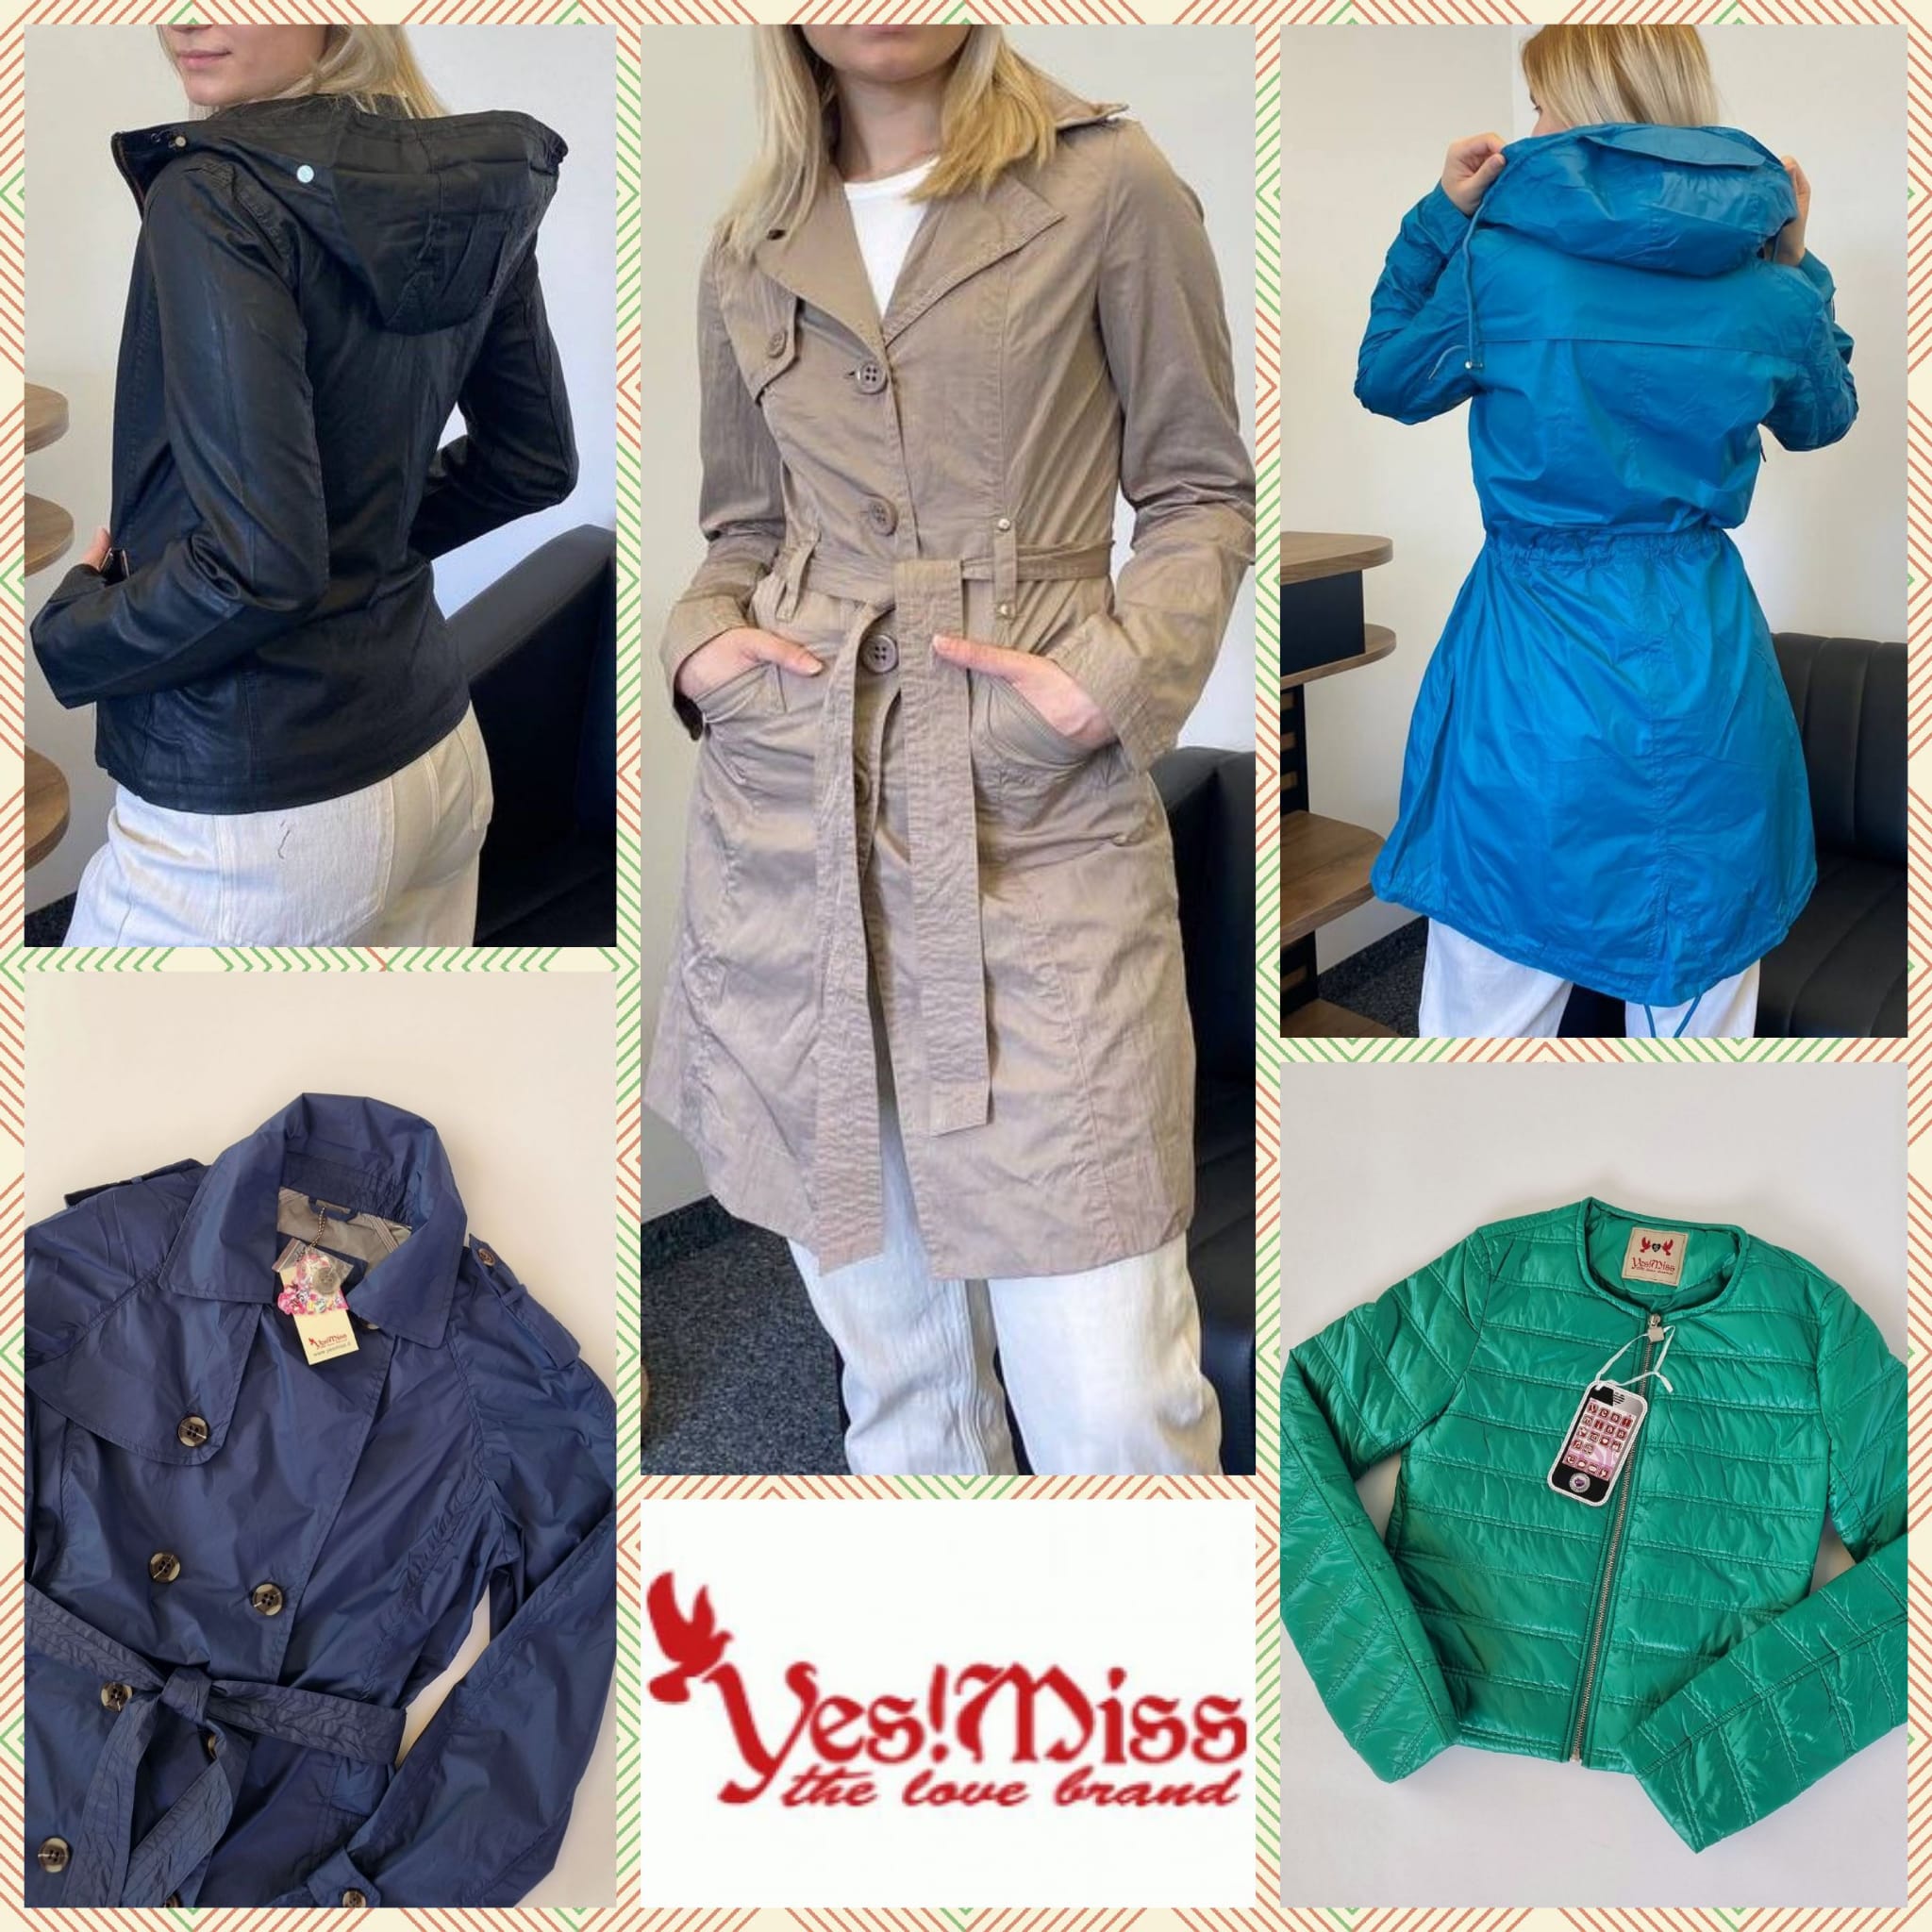 Women's outerwear for the between seasons time from Yes Miss 